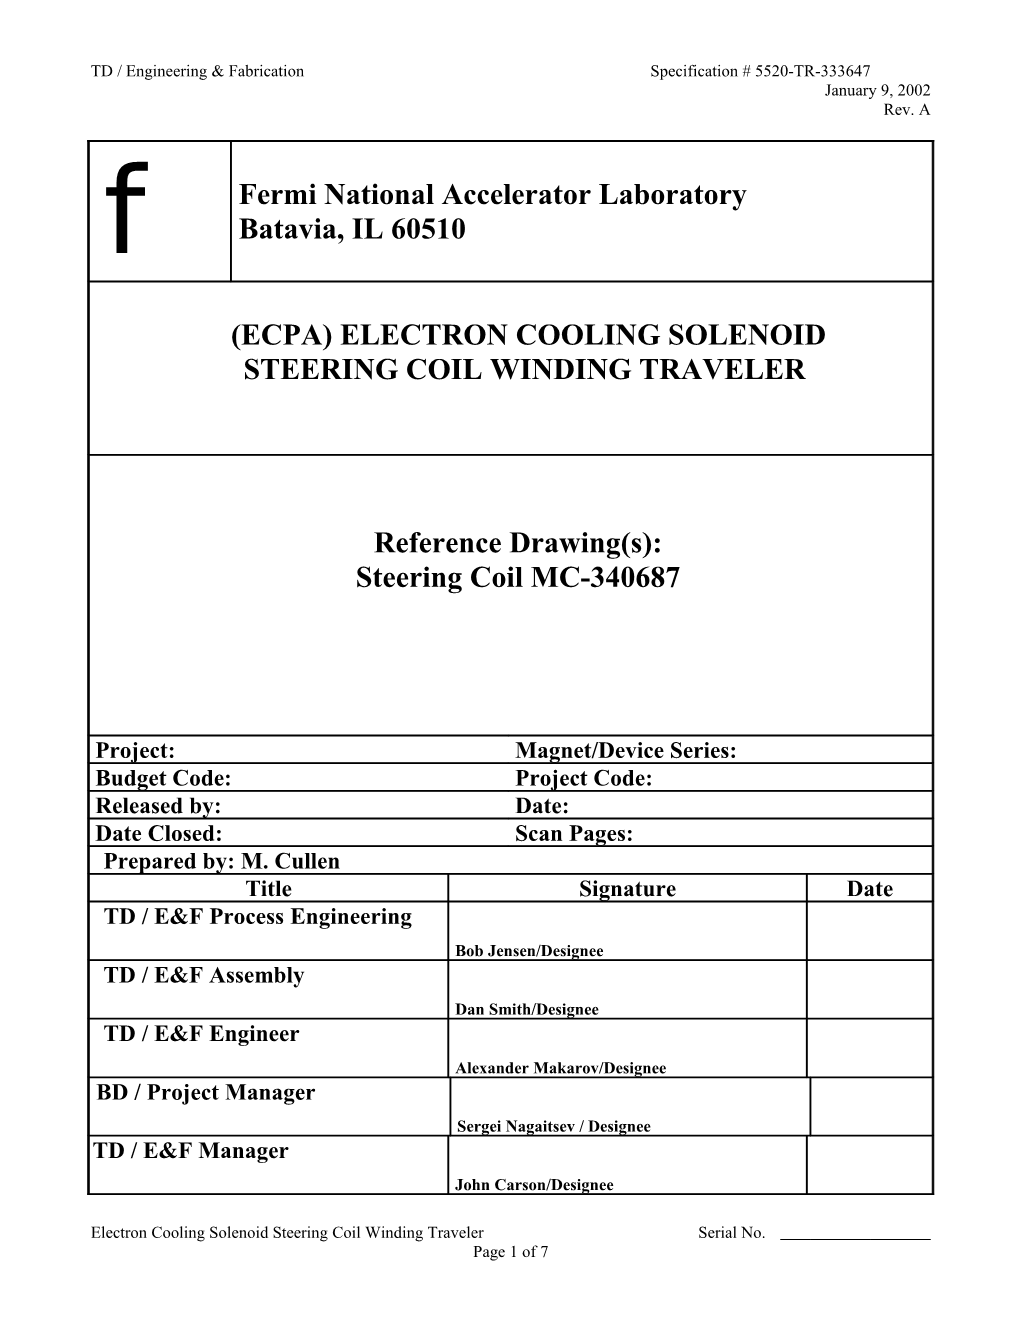 (Ecpa) Electron Cooling Solenoid